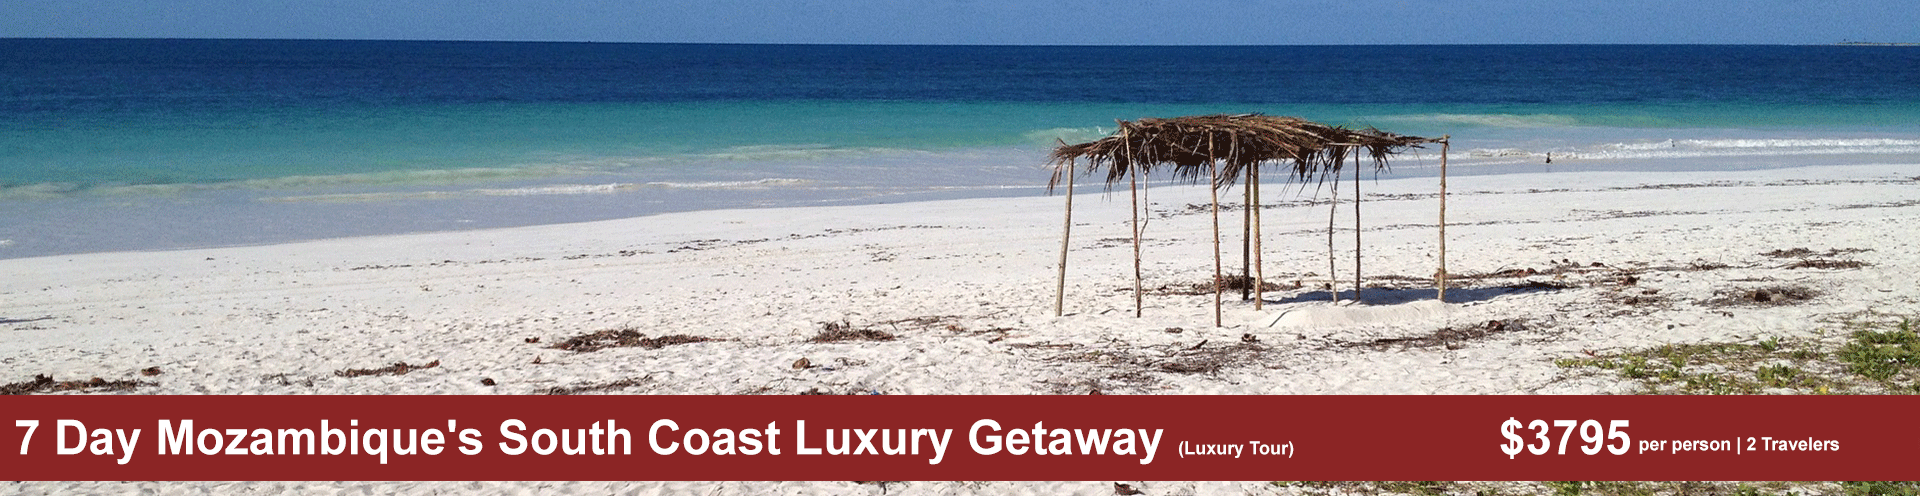 7 Day Mozambique's South Coast Luxury Getaway​